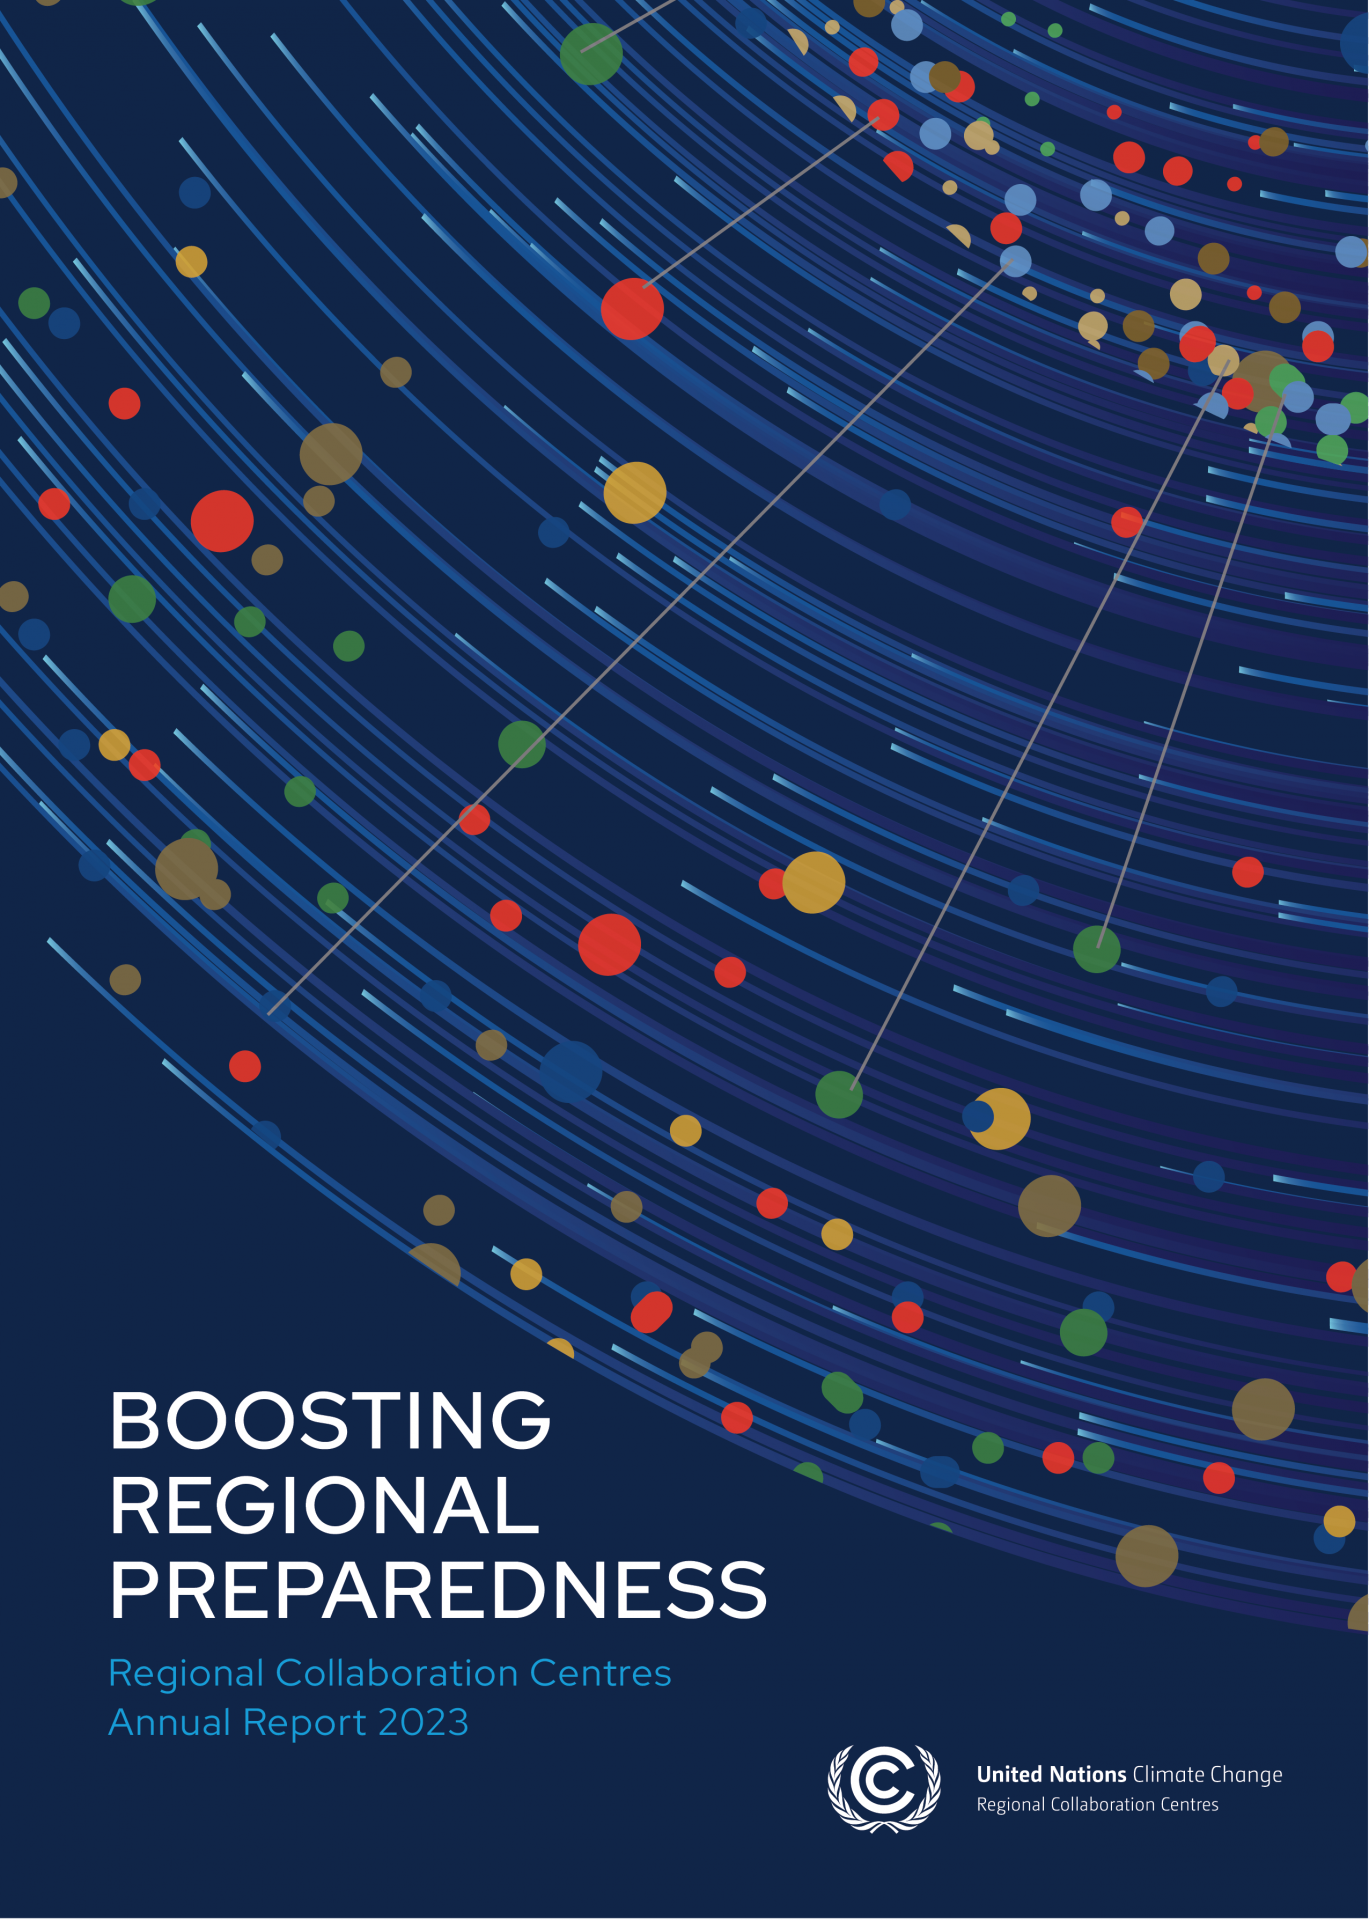 RCC Annual Report 2023 - Cover of the publication entitled "Boosting Regional Preparedness".